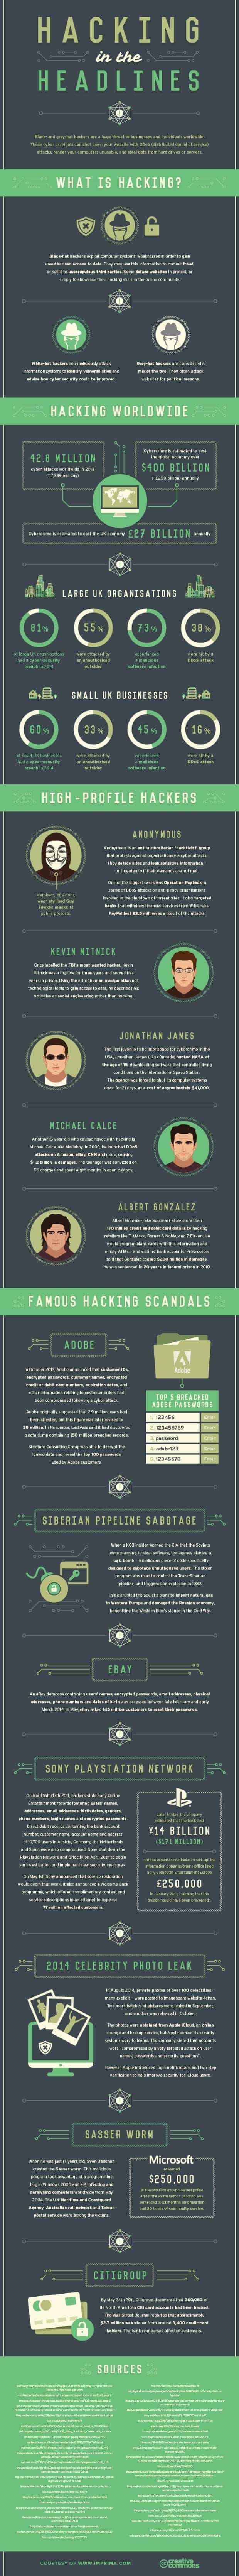 infographic-hacking-in-the-headlines2